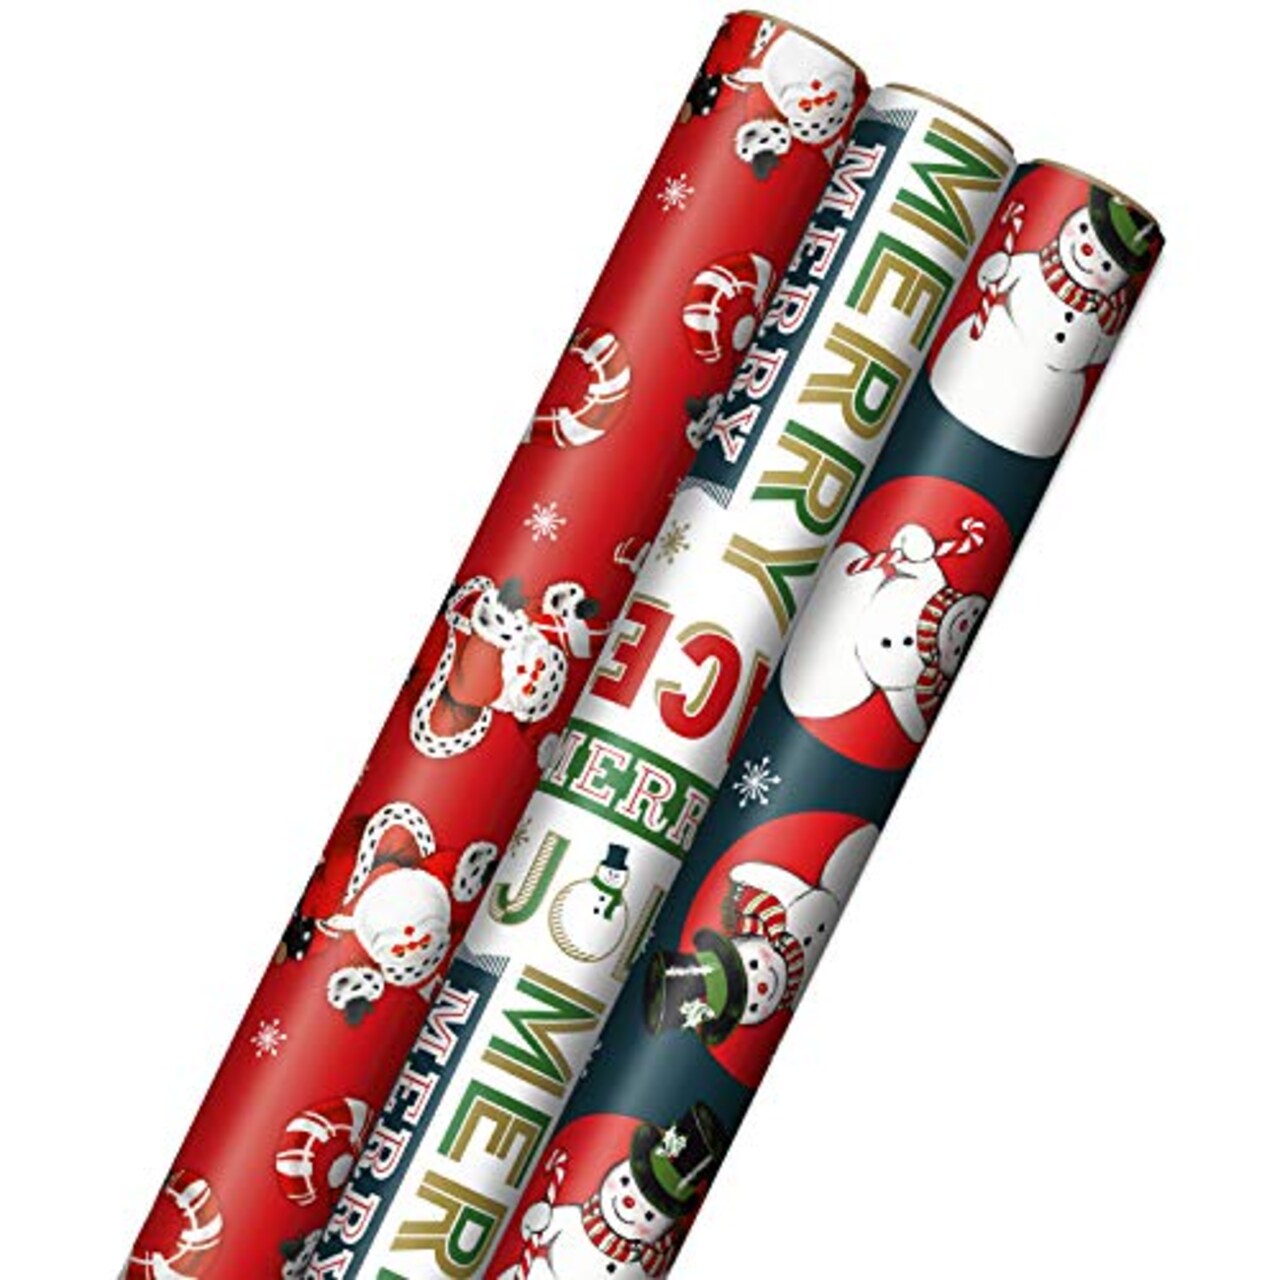 Hallmark Vintage Christmas Wrapping Paper Cut Lines on Reverse (3 Rolls:  120 sq. ft. ttl) Dancing Santas, Classic Snowman, Merry, Jolly, Happy,  Peace